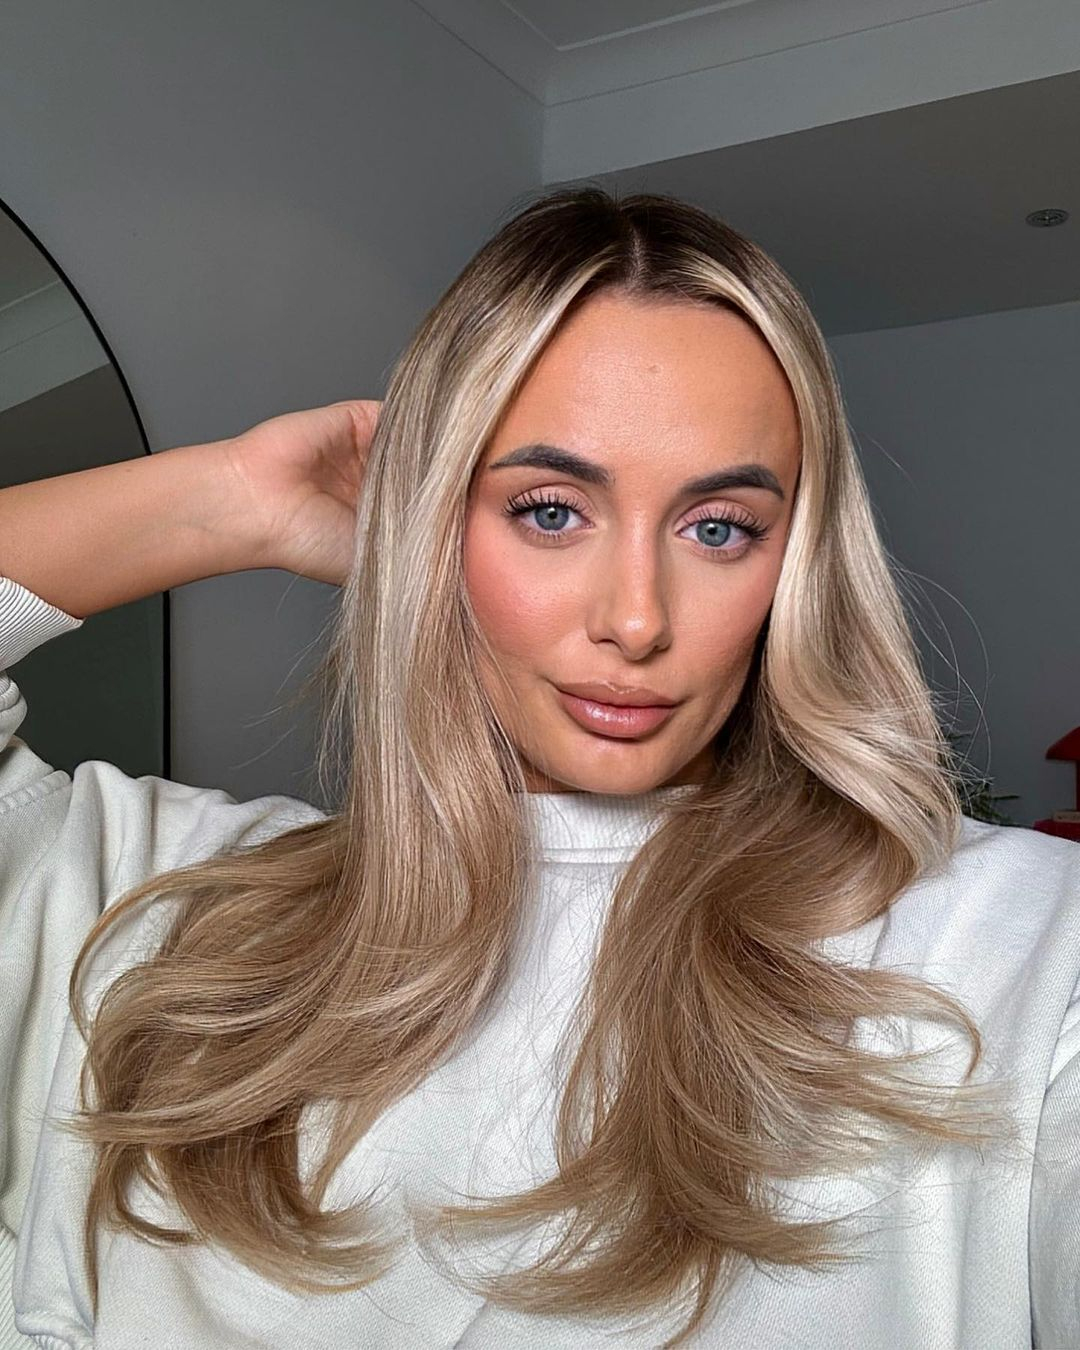 Millie Court shows off her new hair transformation after reuniting with Love Island star ex Liam Reardon